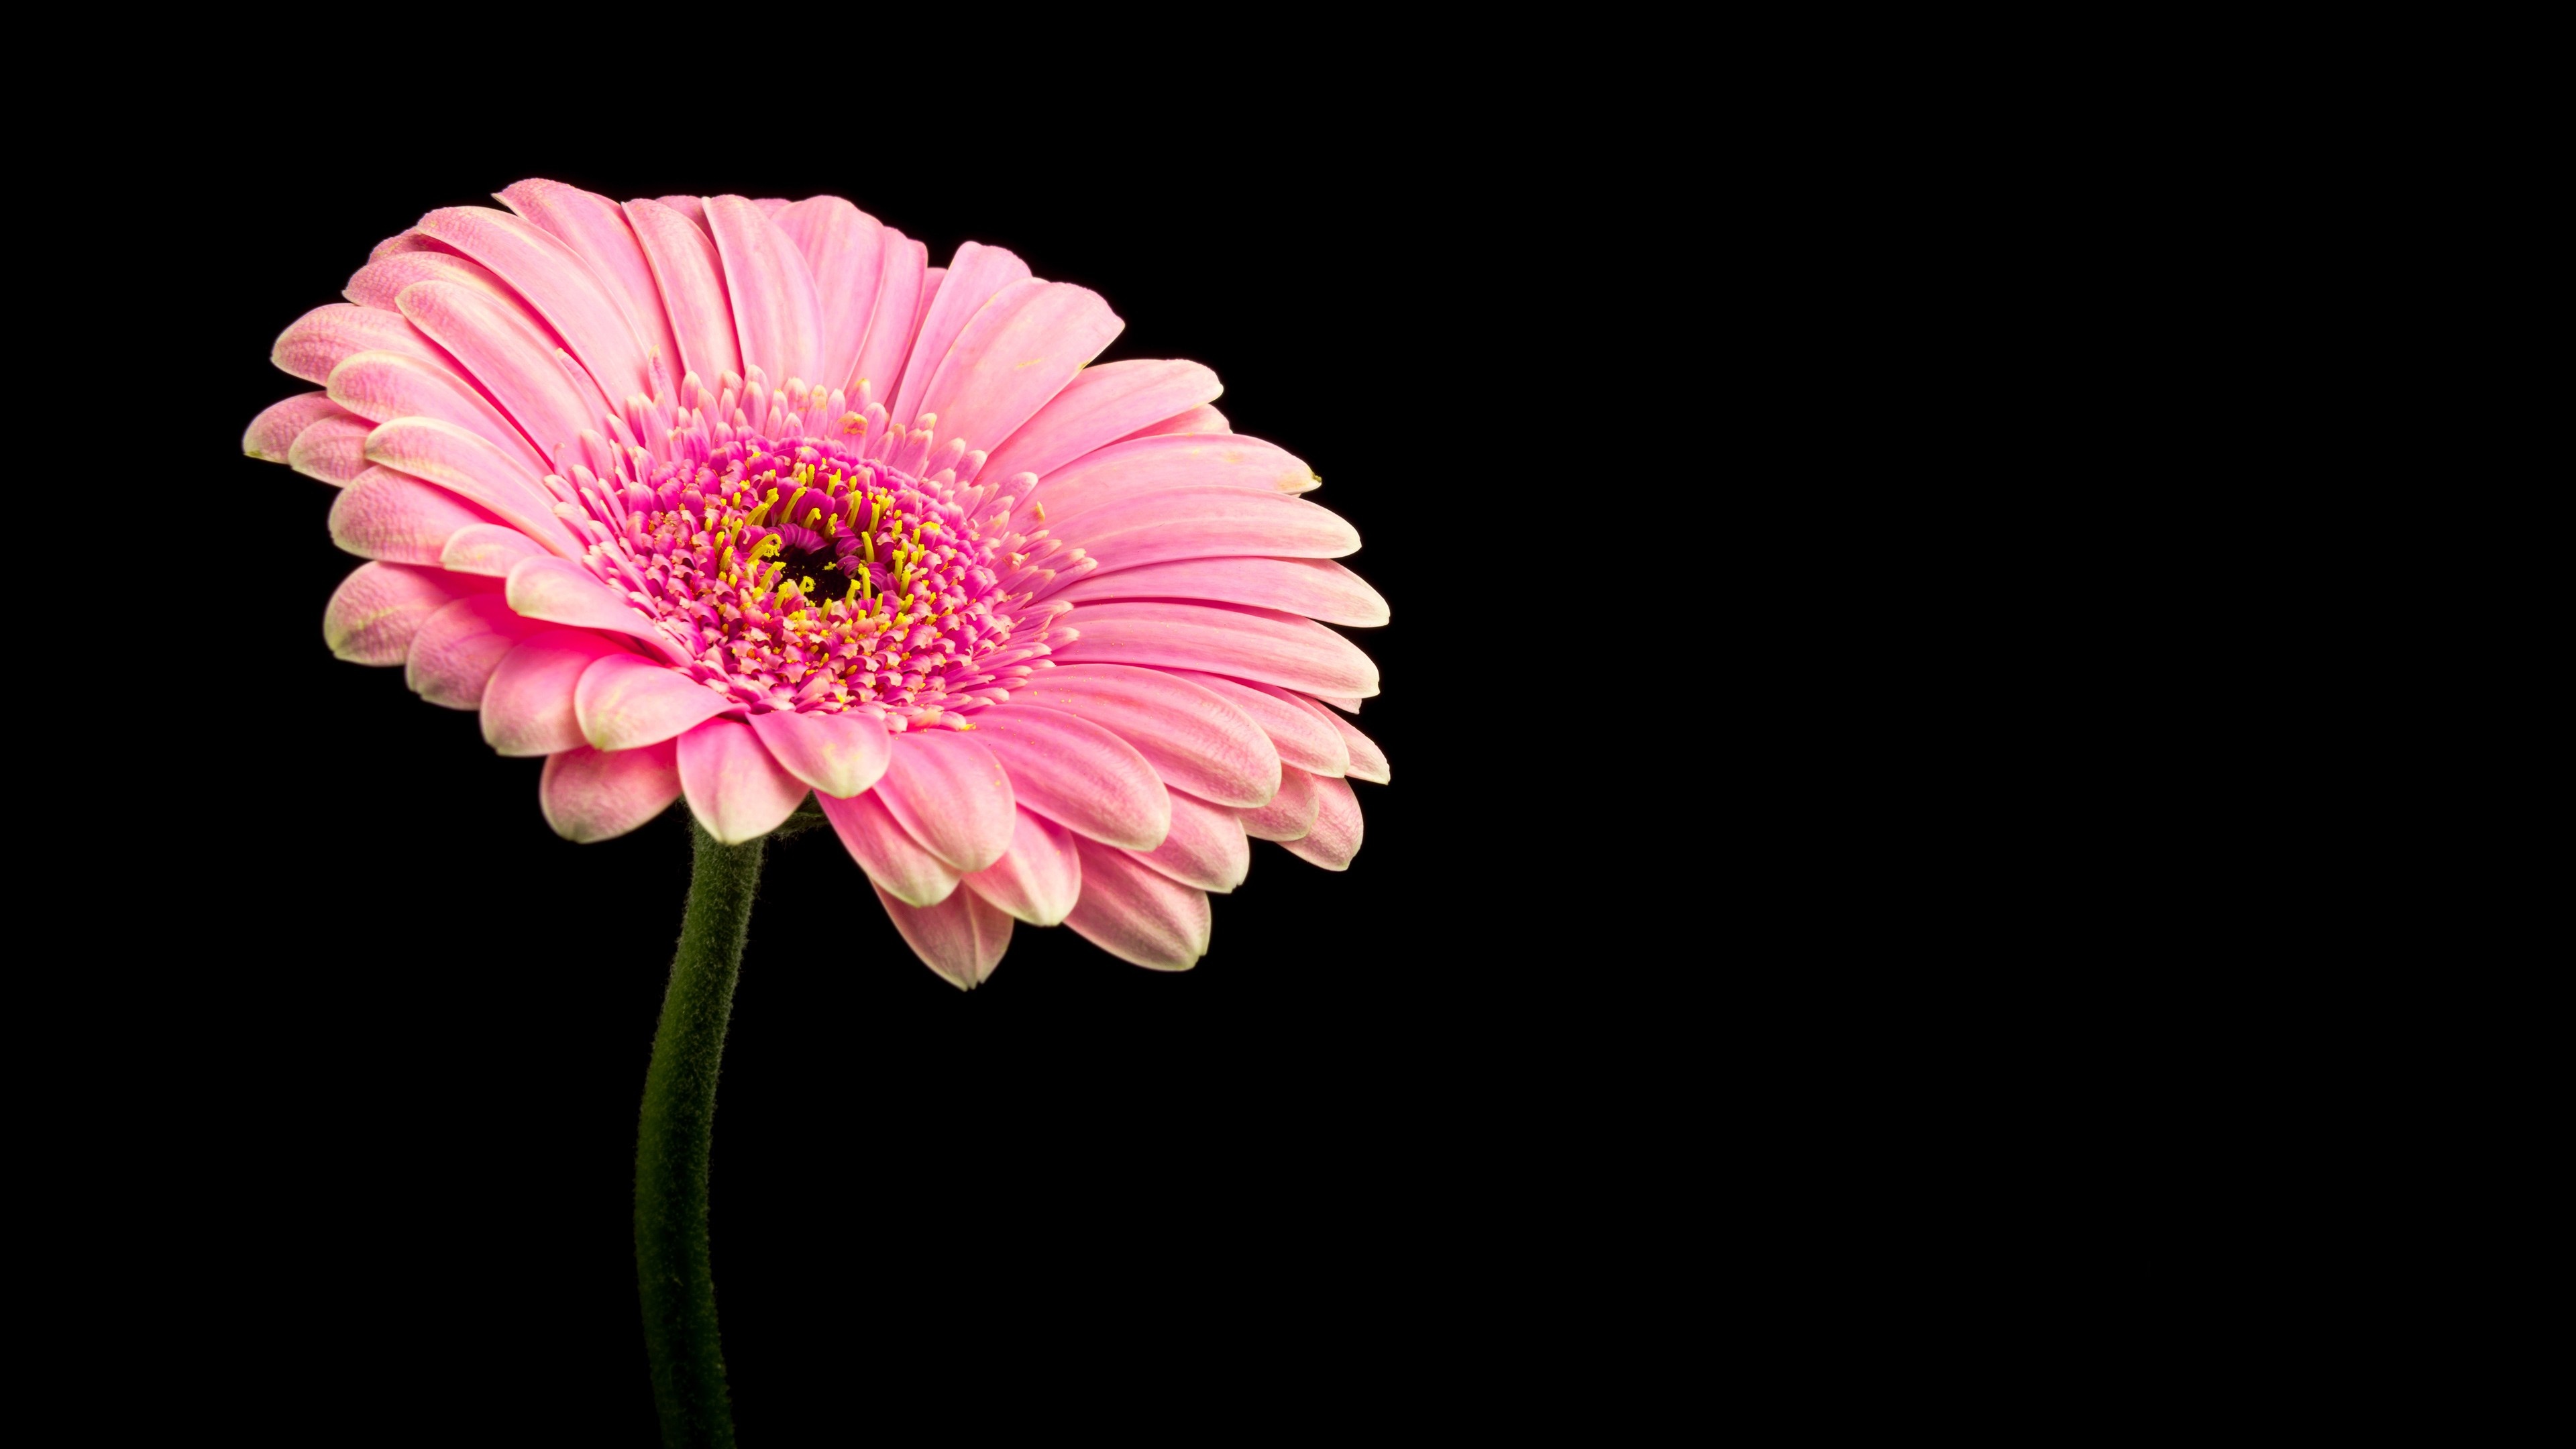 Gerbera Daisy: Named in honor of German botanist and medical doctor Traugott Gerber who traveled extensively in Russia and was a friend of Carl Linnaeus. 3840x2160 4K Wallpaper.